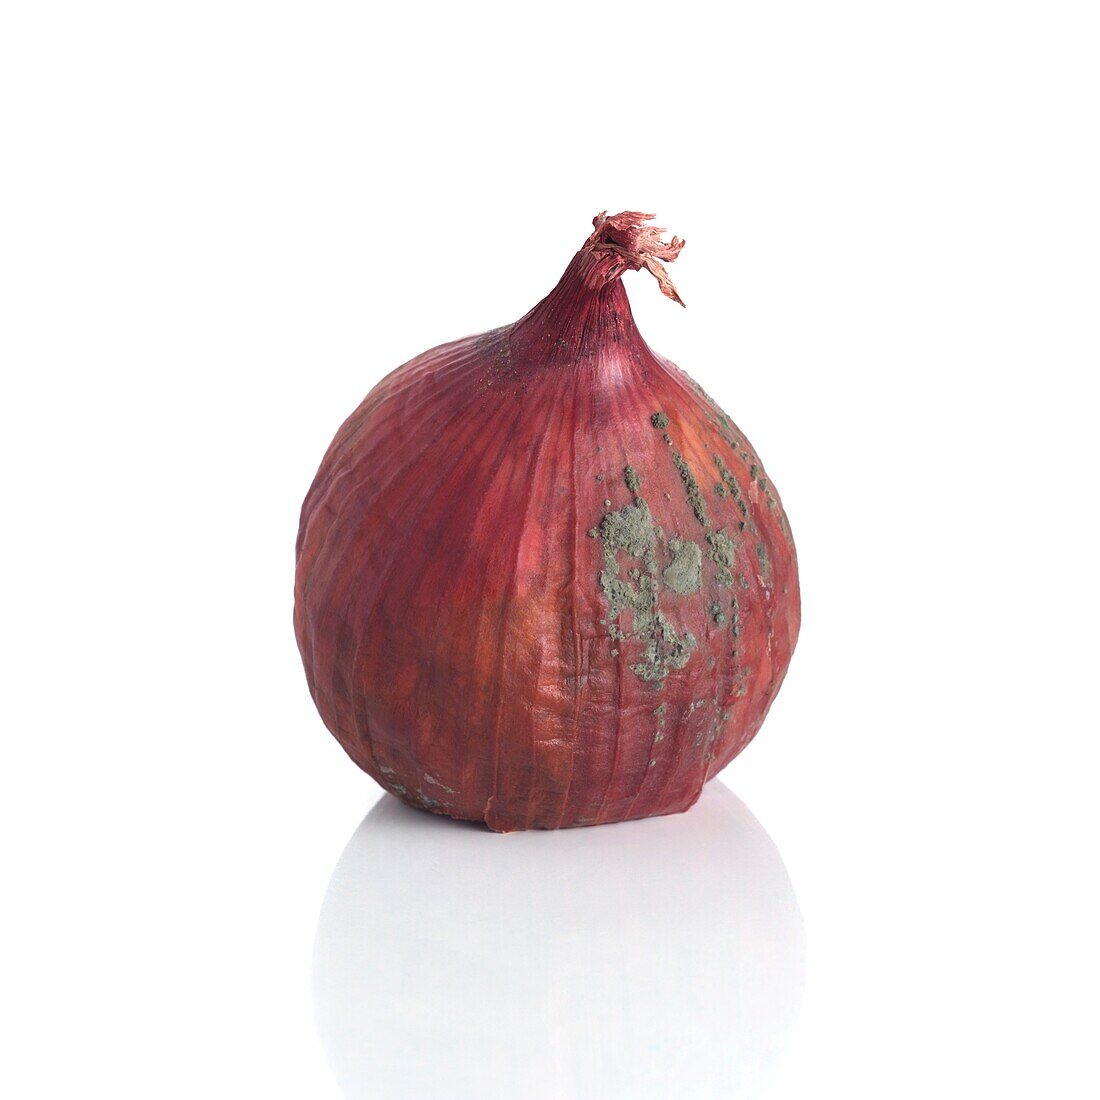 Mouldy red onion